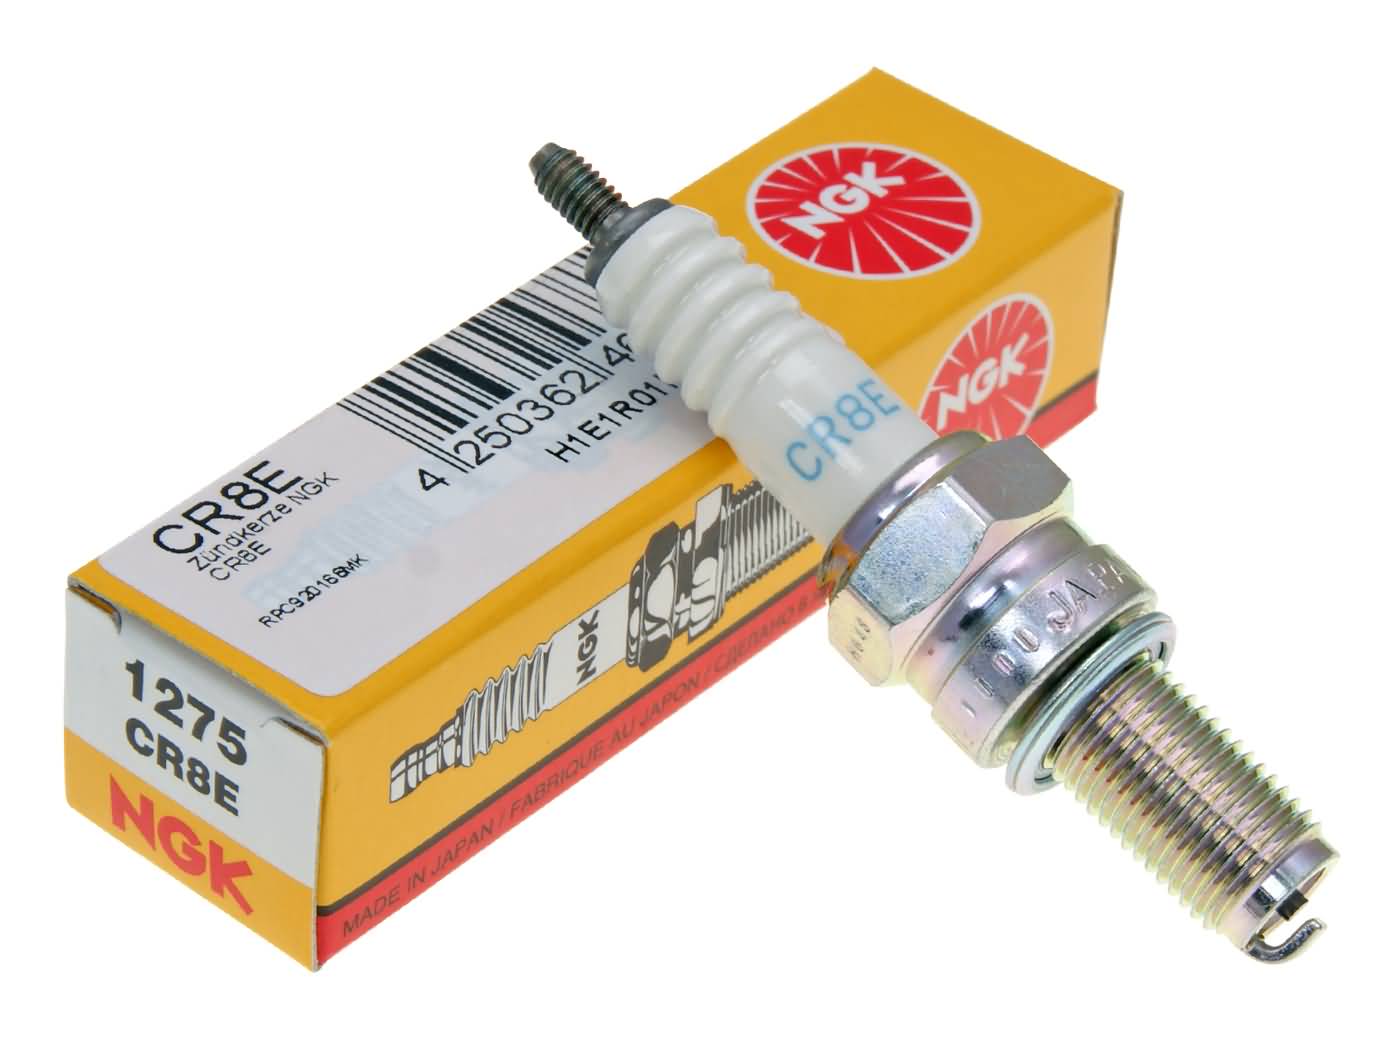 NEW GENUINE NGK REPLACEMENT COPPER CORE SPARK PLUG CR8E SET OF 4 @PUMMY